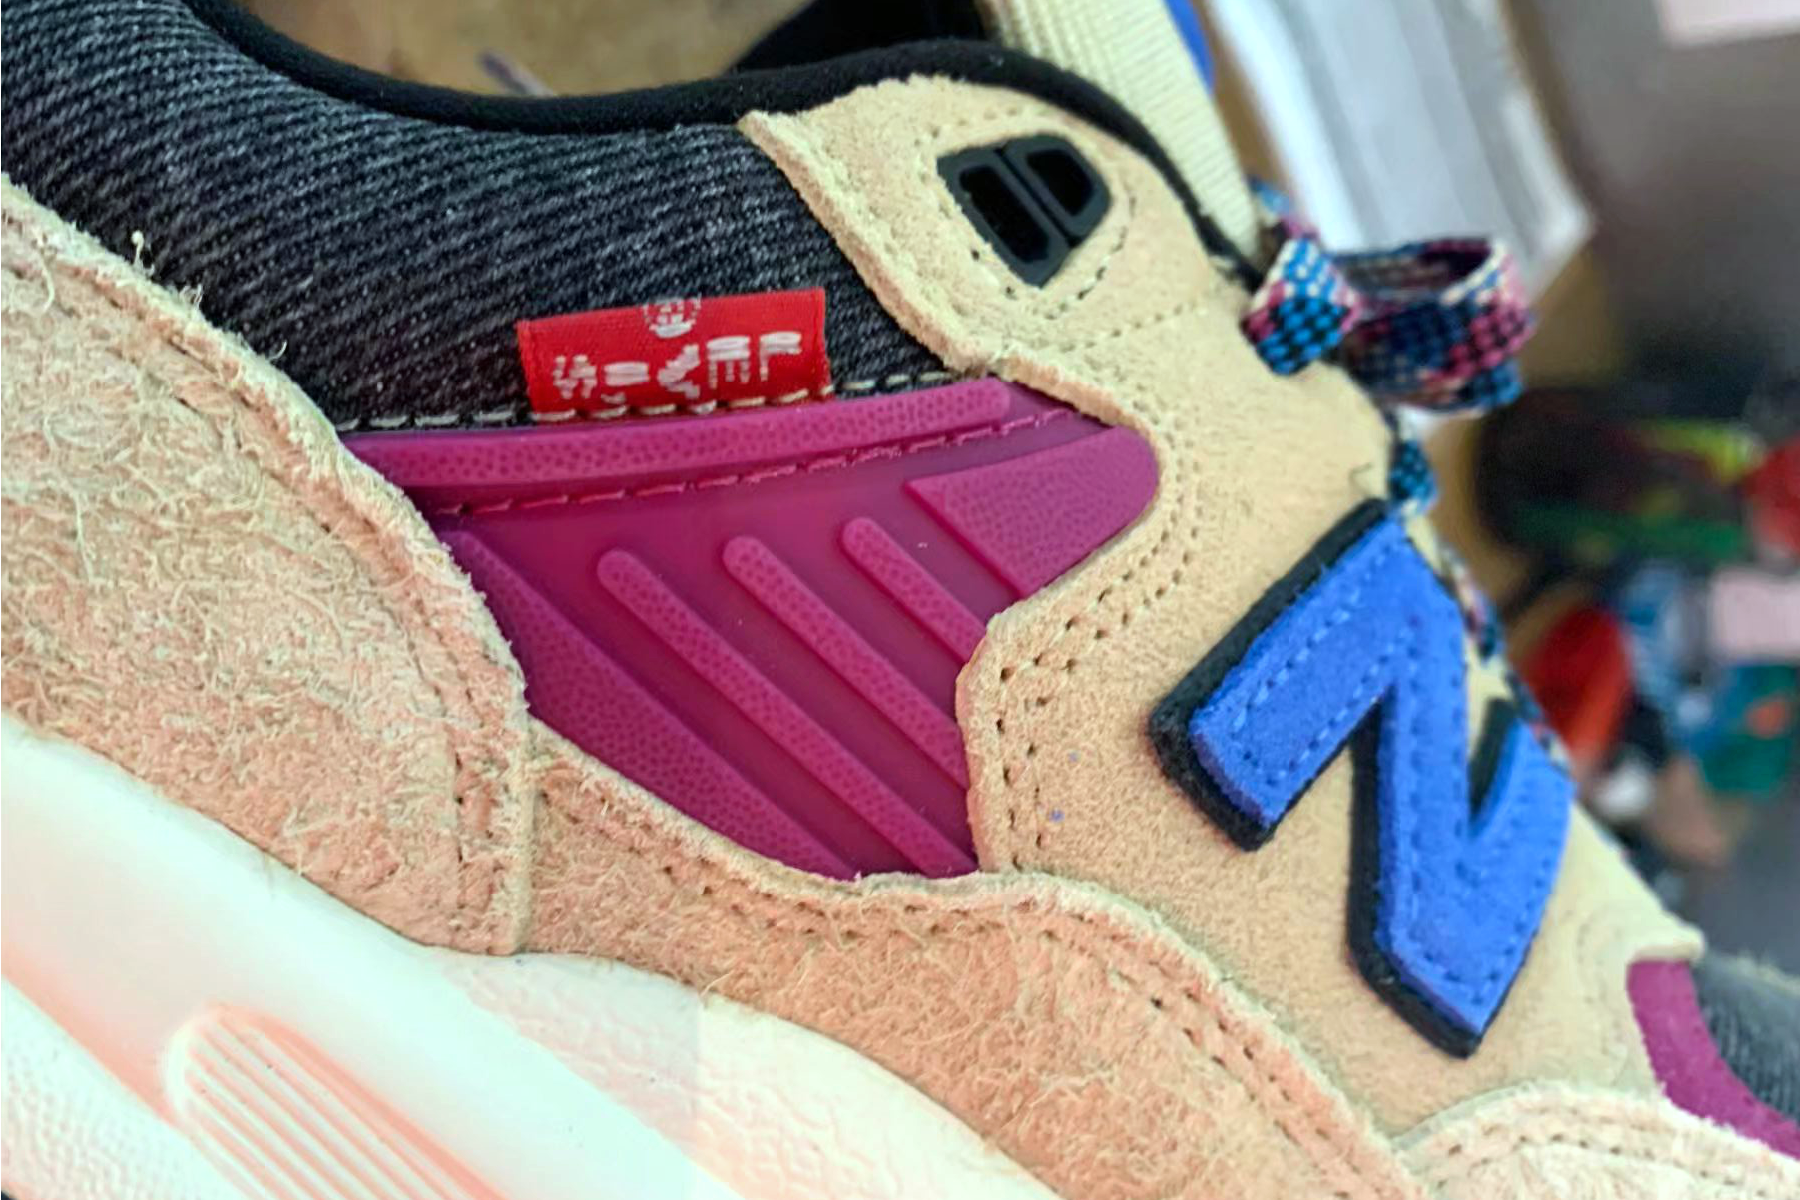 New Balance & Levi's beige and pink 580 shoe collab